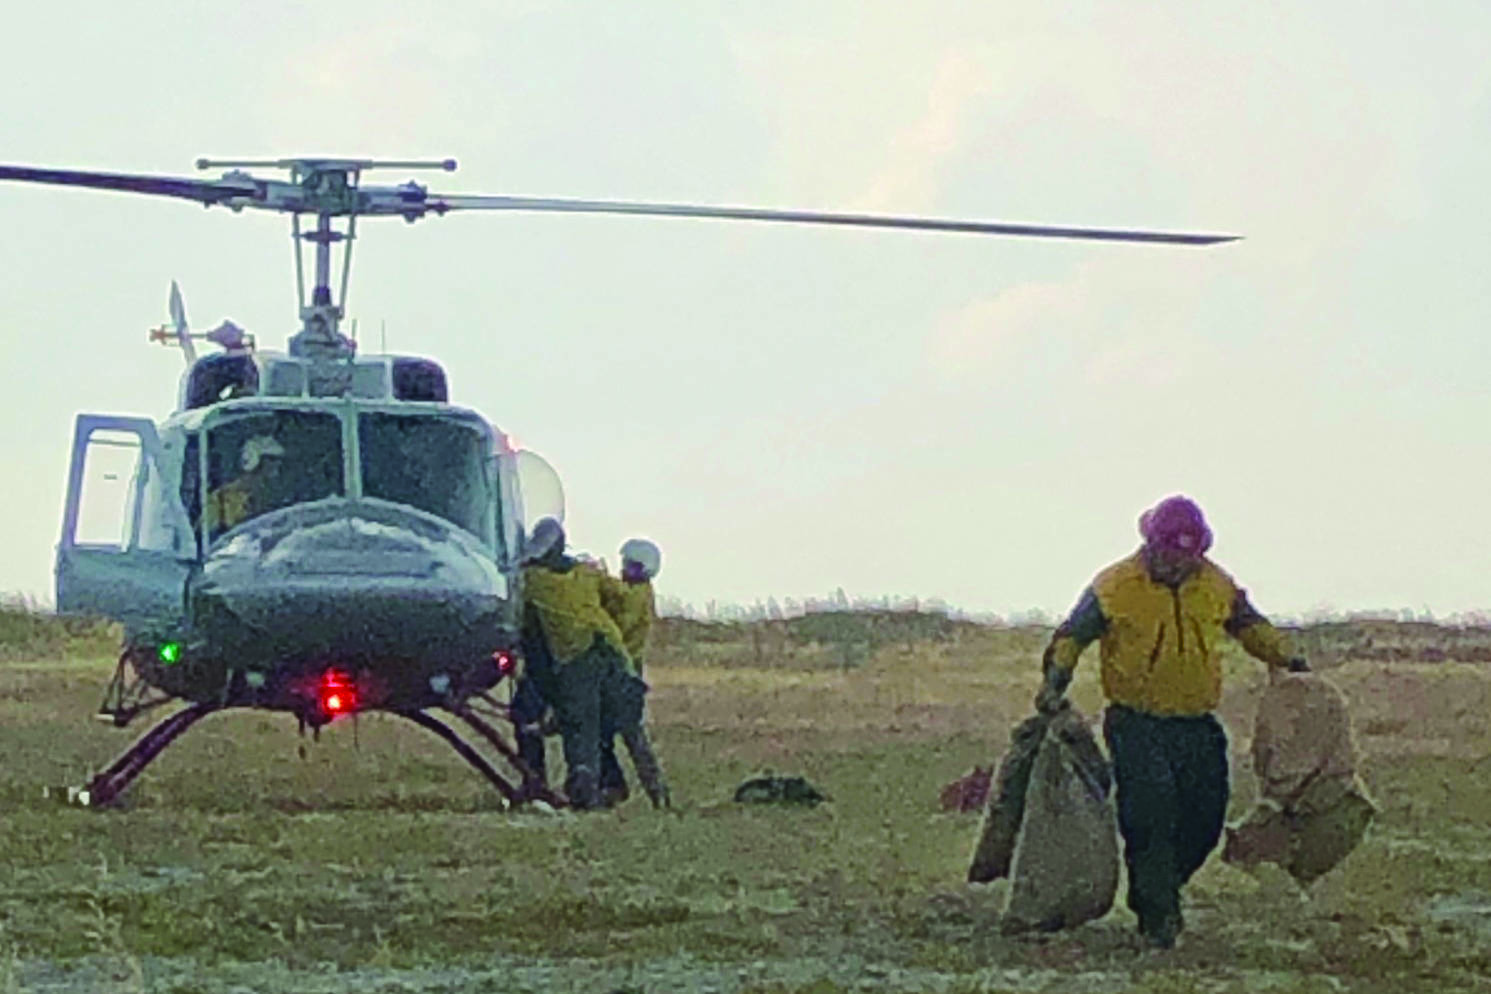 Firefighters unload supplies from a helicopter at the Caribou Lake Fire on Monday, Aug 26, 2019, northeast of Homer, Alaska. (Photo by Sarah Saarloos/Alaska Division of Forestry)